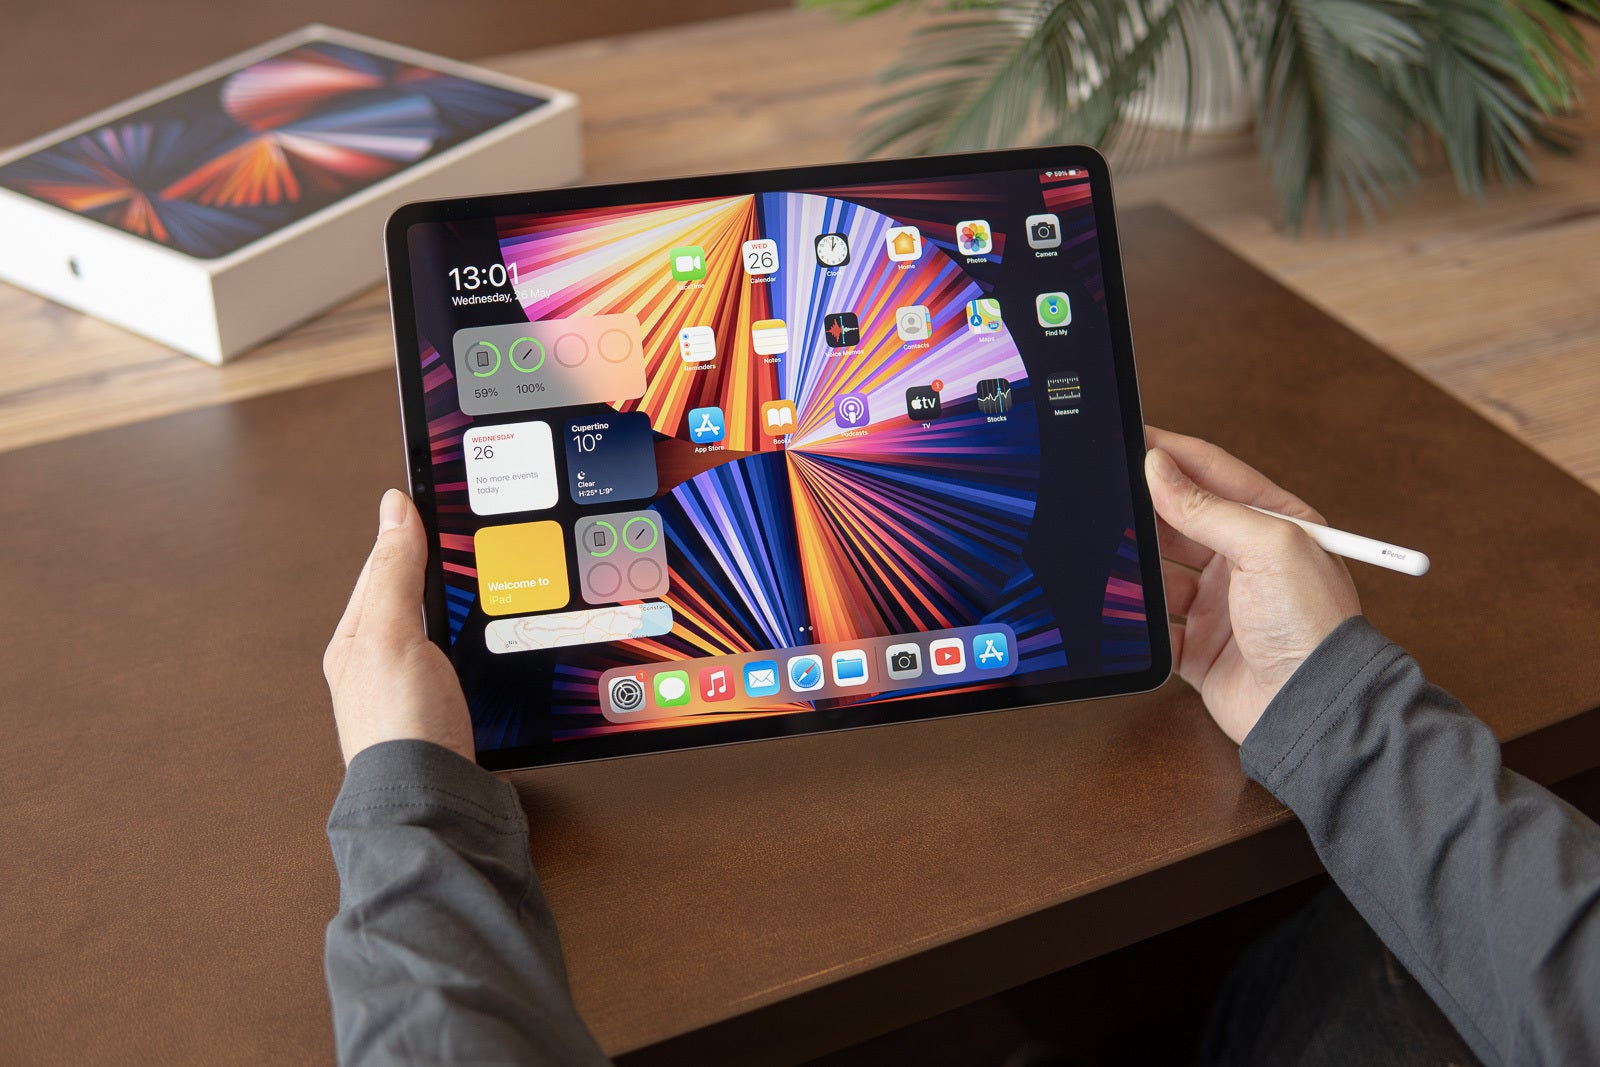 iPadOS looks good, but it doesn't feel good when you attempt to any serious work on it - iPad Pro should absolutely steal these Surface Pro features